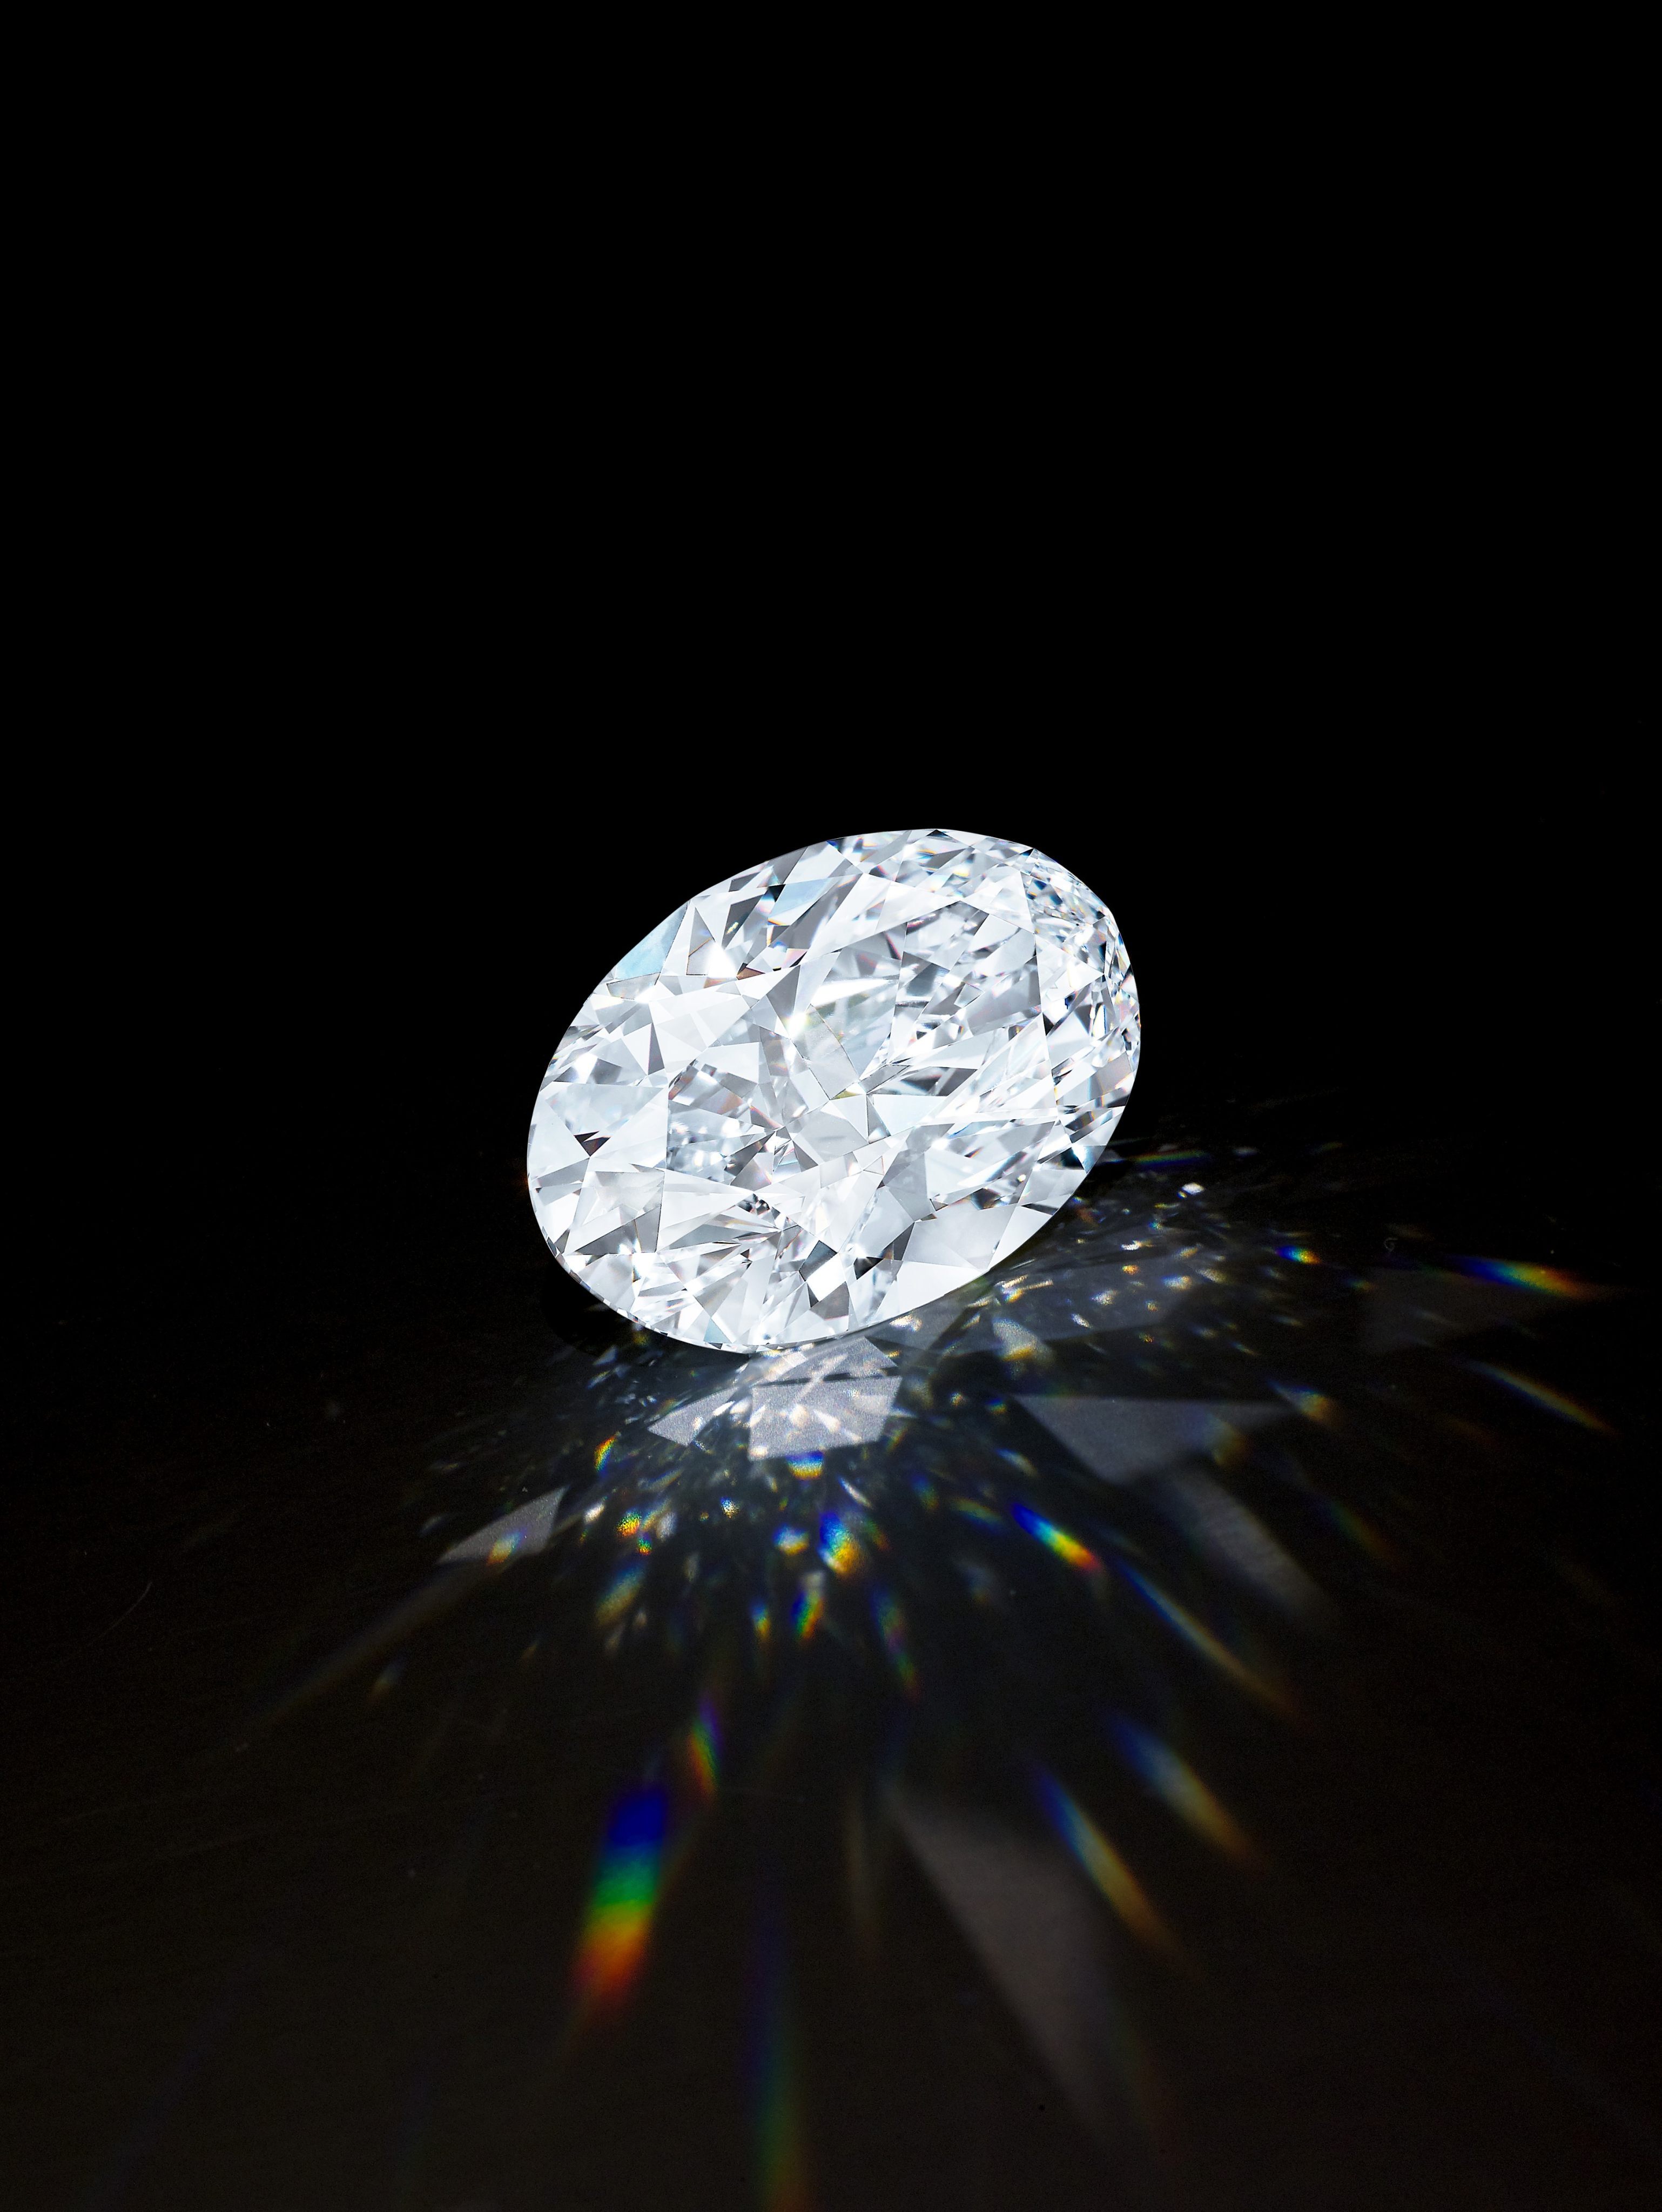 The 102.39-carat D-colour flawless oval diamond, sold at auction for US$15.6 million by Sotheby’s Hong Kong. Photo: Sotheby’s